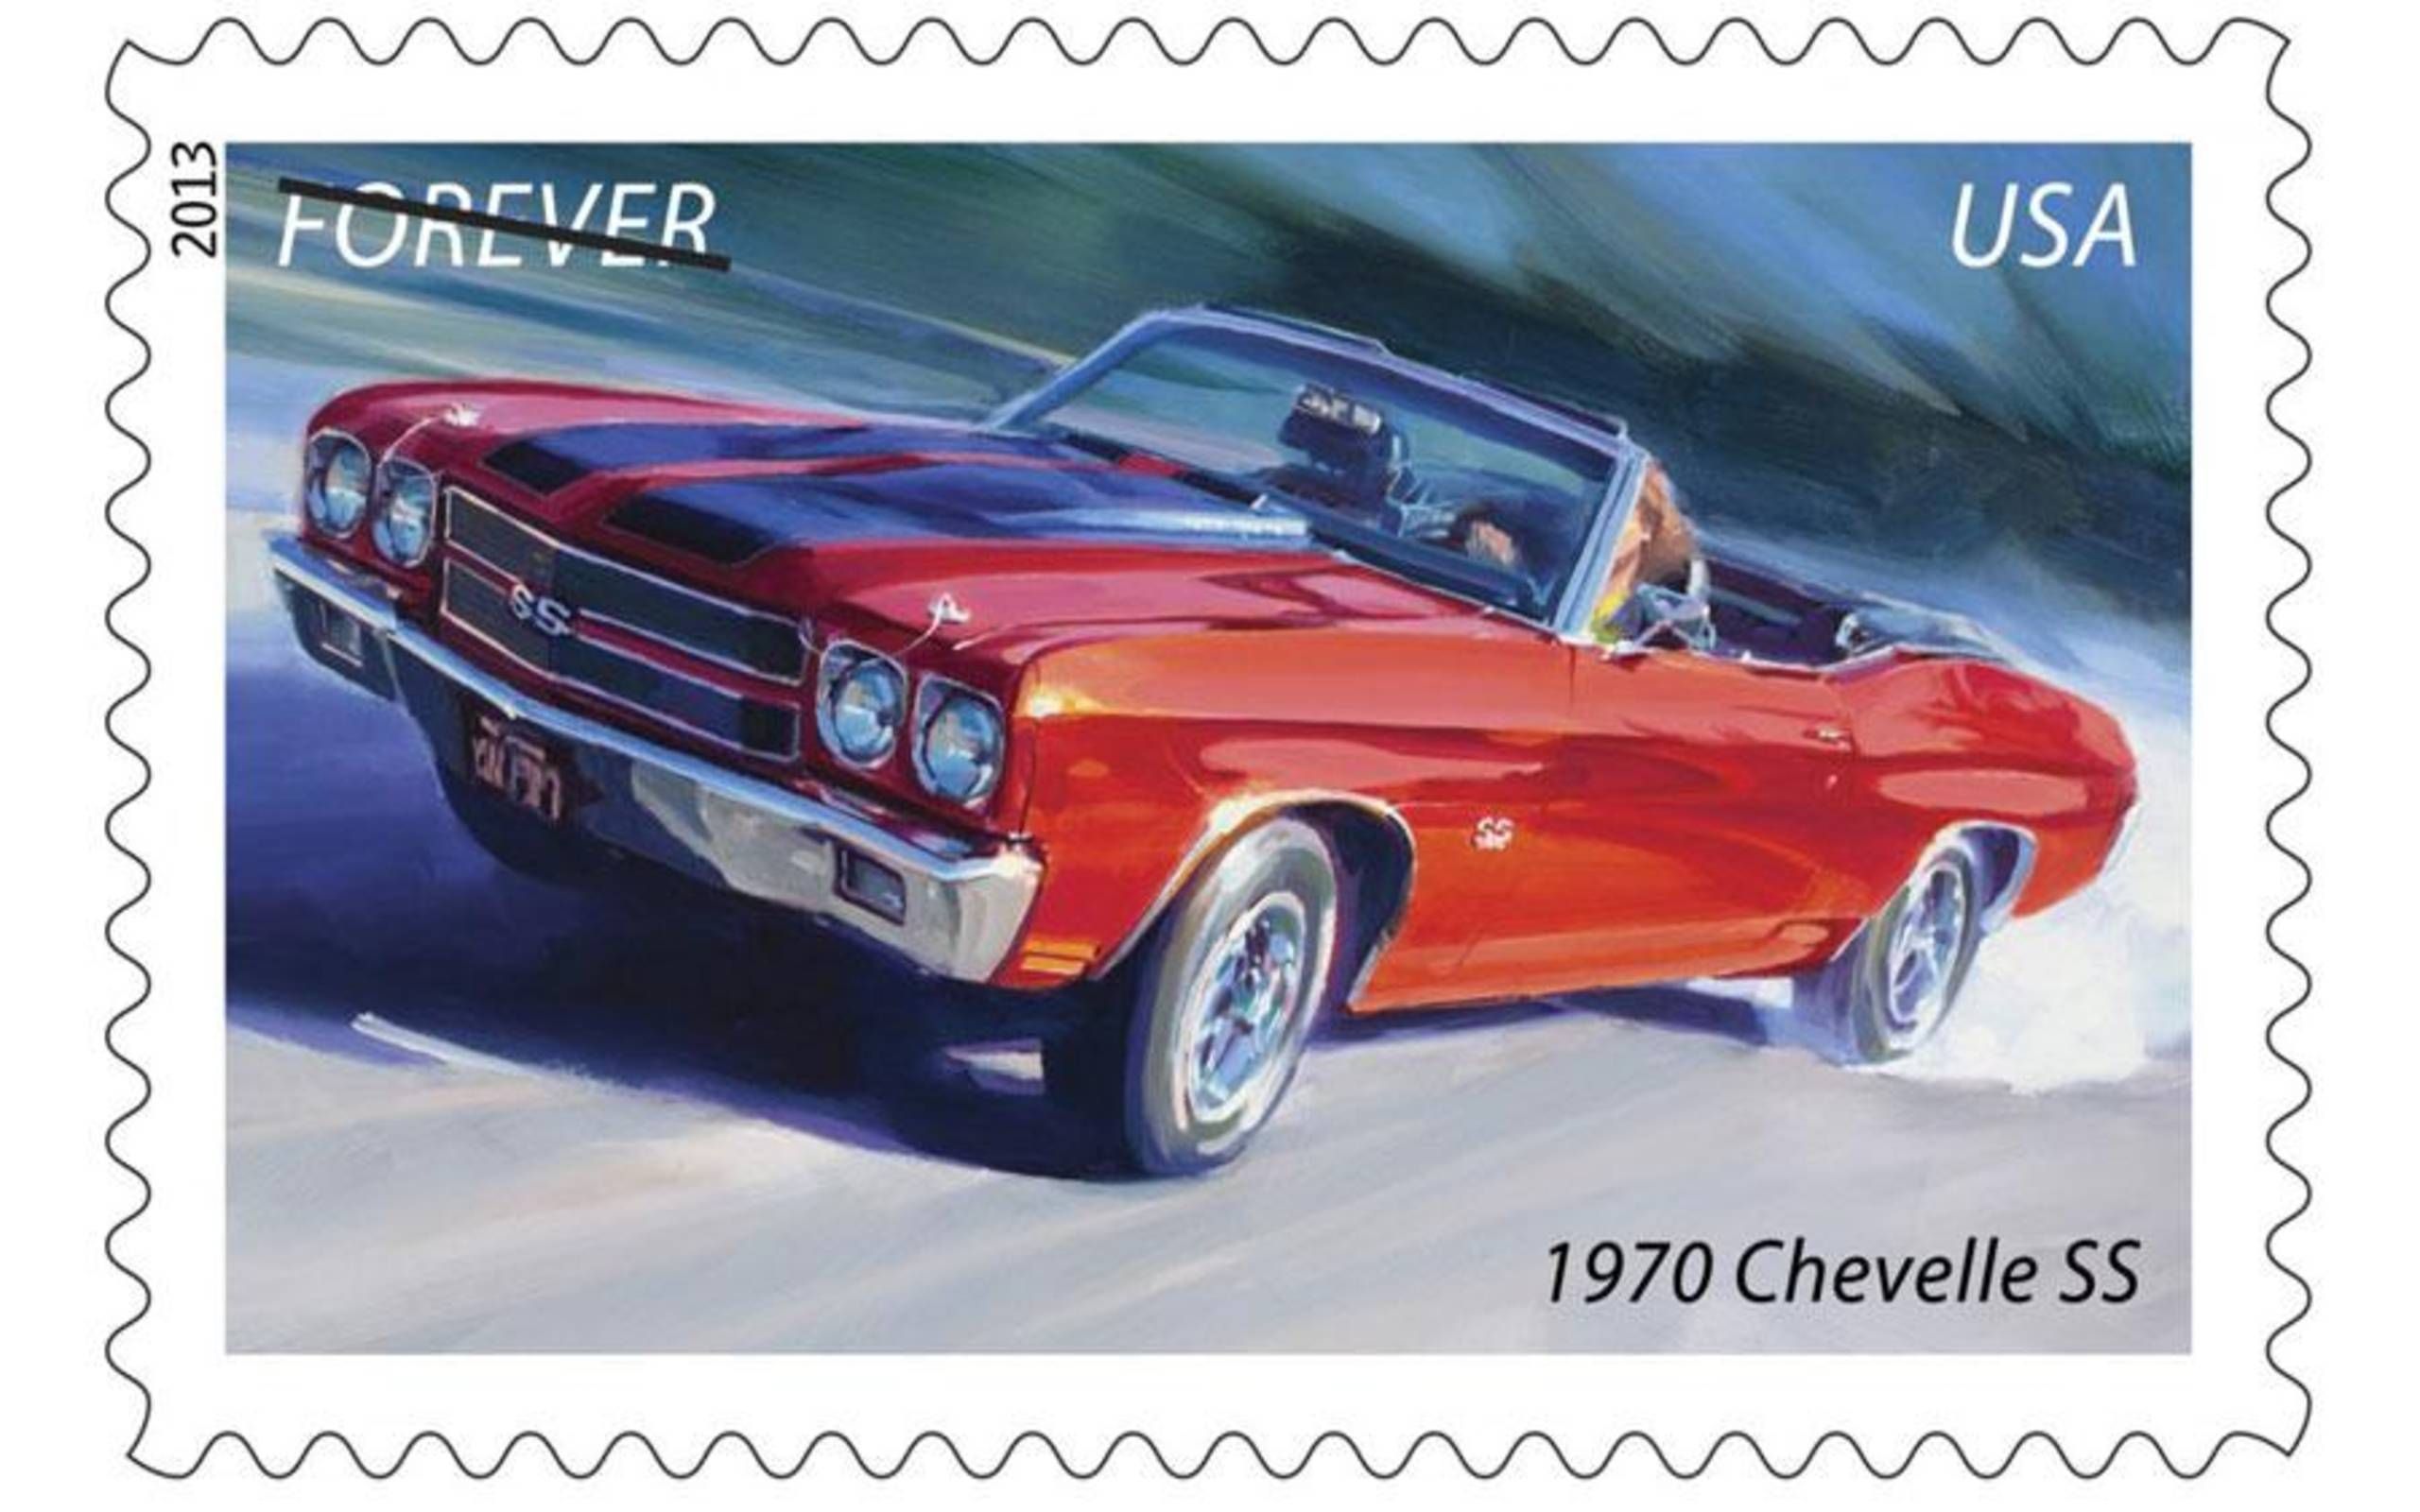 Stamp 2016, Germany, Federal Republic Classic Cars, Porsche 911 & Ford Capri  2 m/ss, 2016 - Collecting Stamps - PostBeeld - Online Stamp Shop -  Collecting